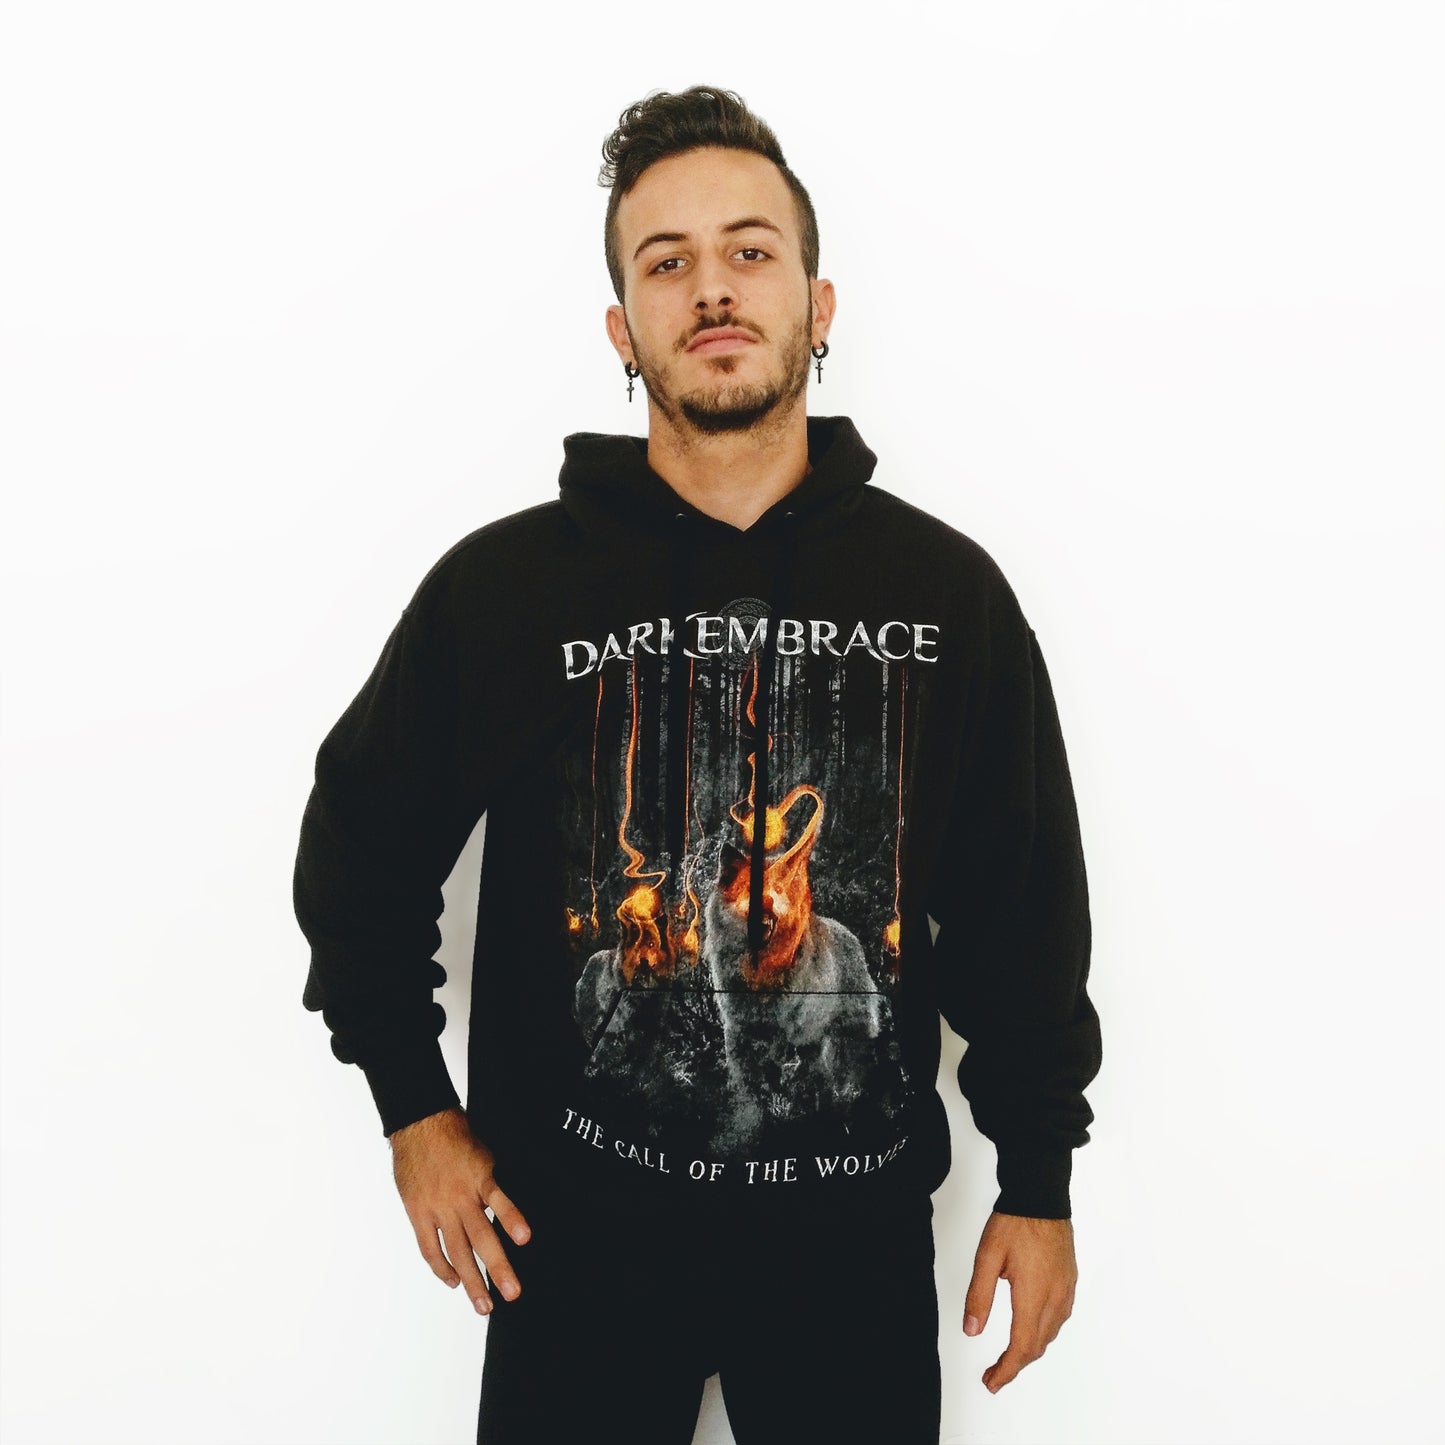 The Call Of The Wolves hoodie